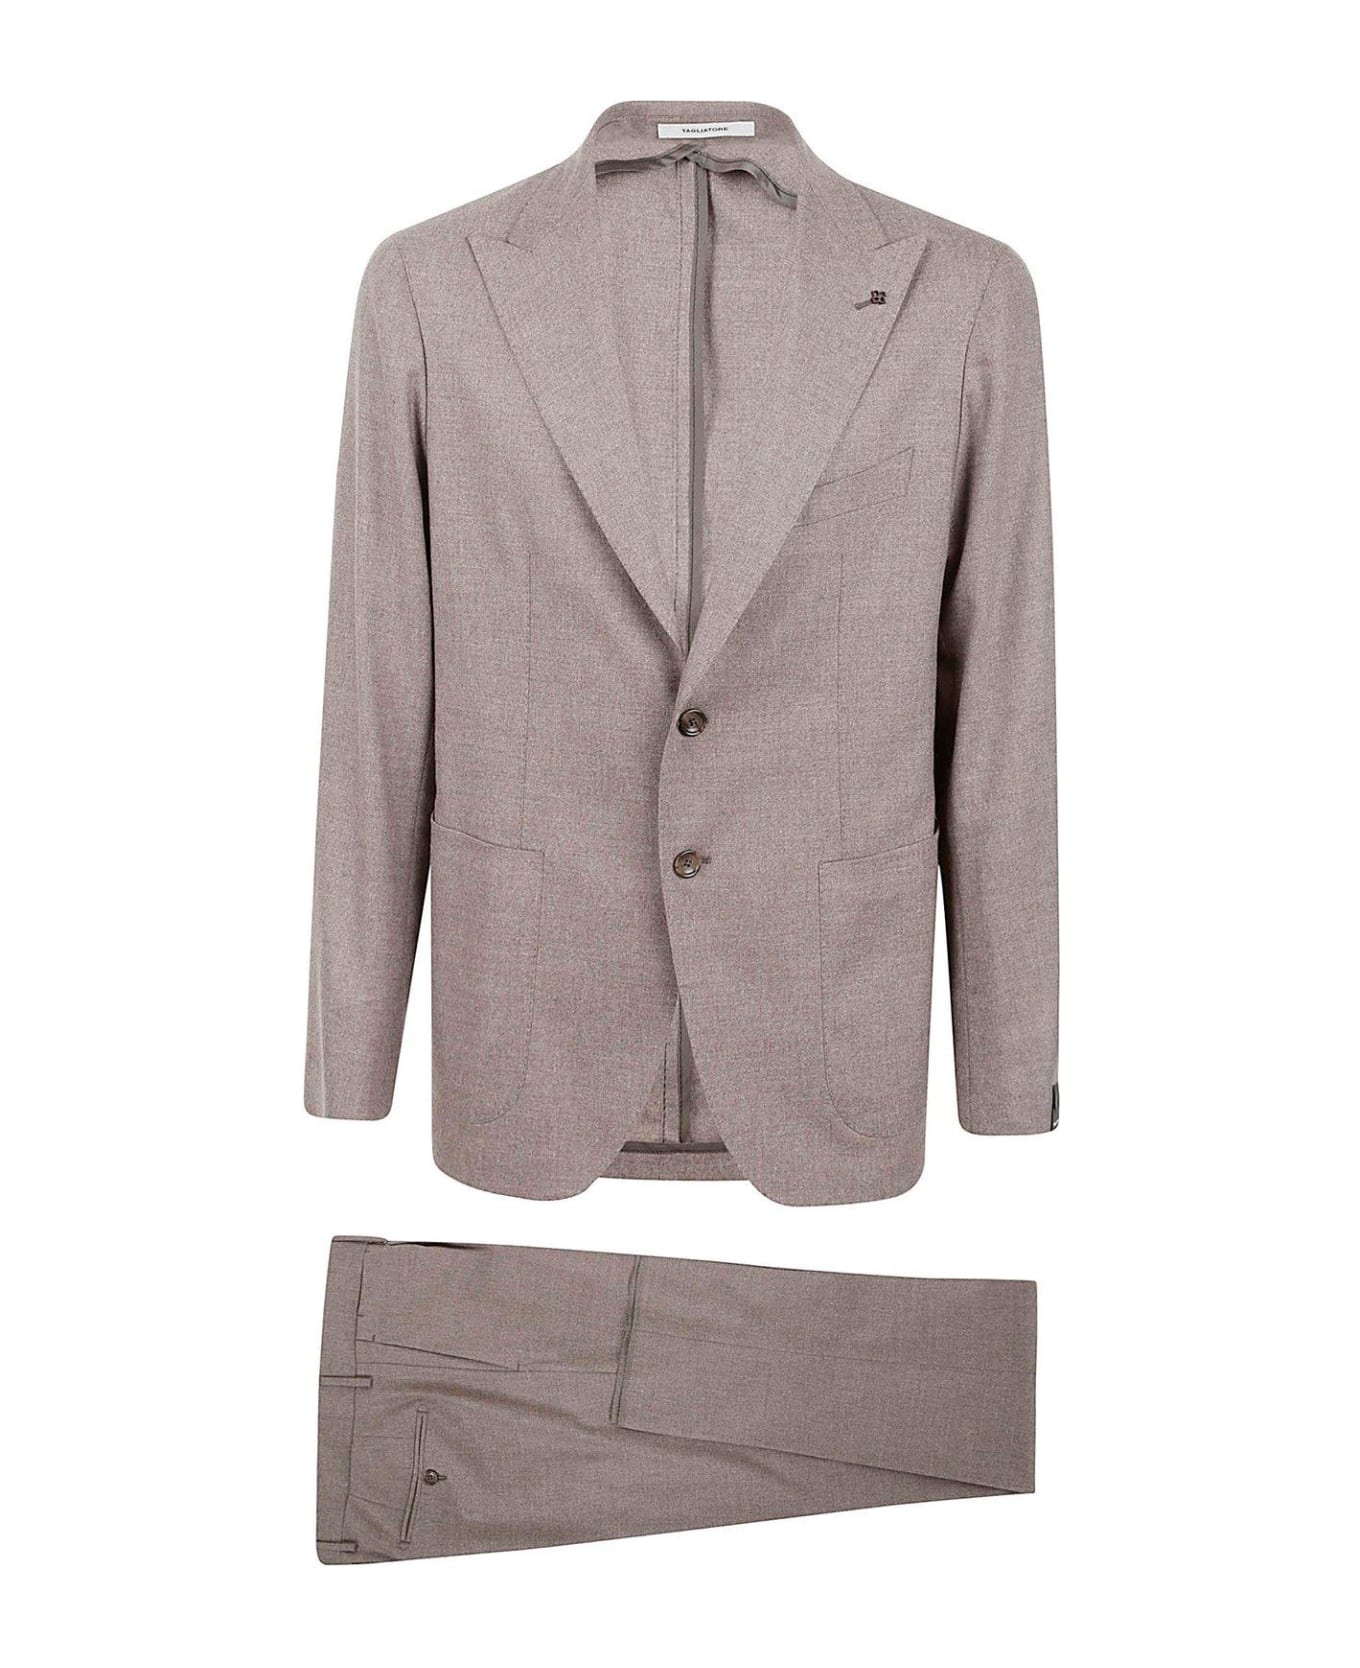 Tagliatore Single-breasted Two-piece Suit Set - Beige スーツ